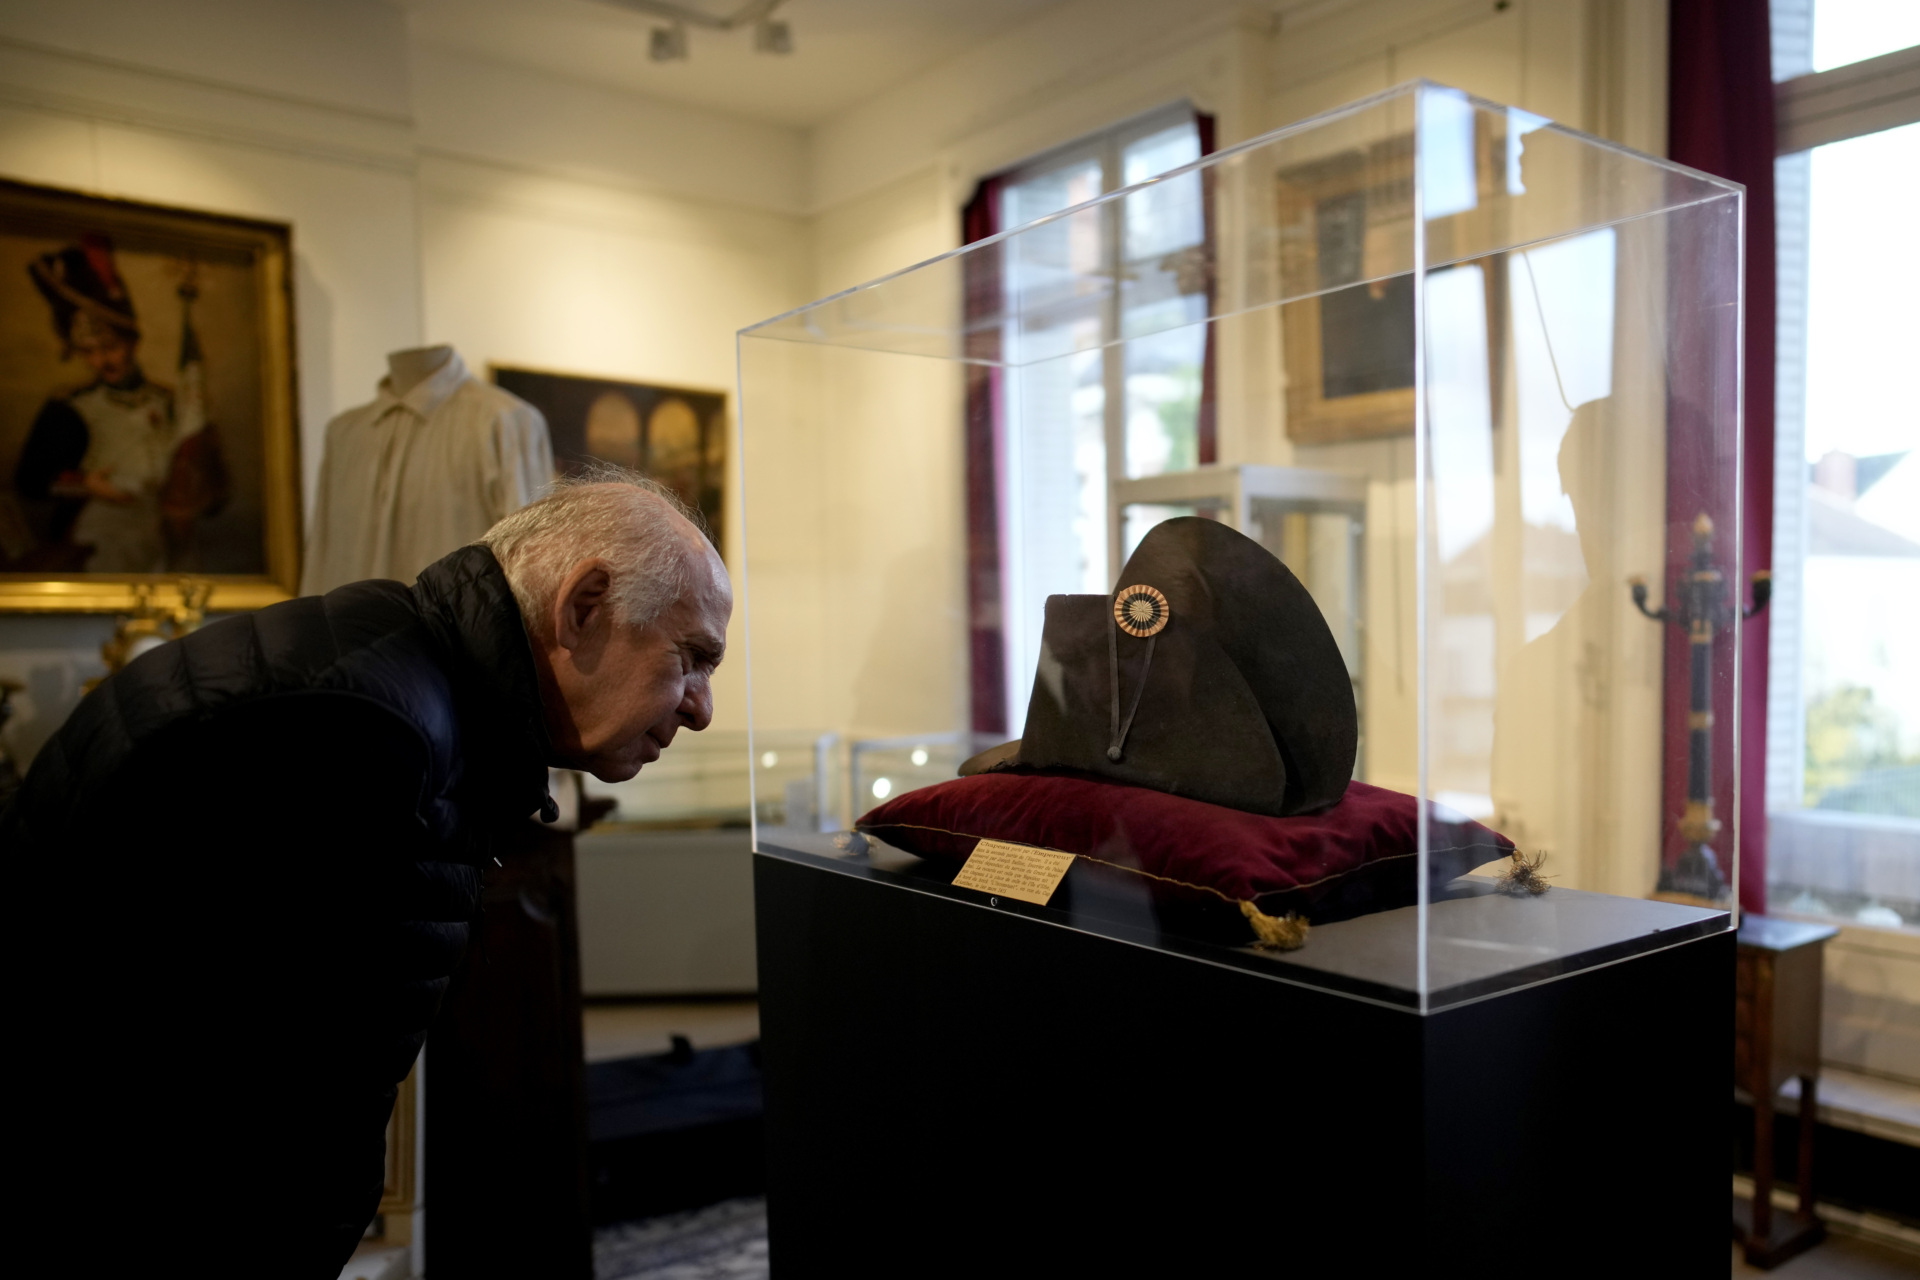 A visitor watches one of the signature broad, black hats that Napoléon wore when he ruled 19th century France and waged war in Europe on display at Osenat's auction house in Fontainebleau, south of Paris, Friday, Nov. 17, 2023. The hat is tipped to fetch more than half a million euros (dollars) at the auction Sunday of Napoleonic memorabilia patiently collected by a French industrialist. (AP Photo/Christophe Ena)